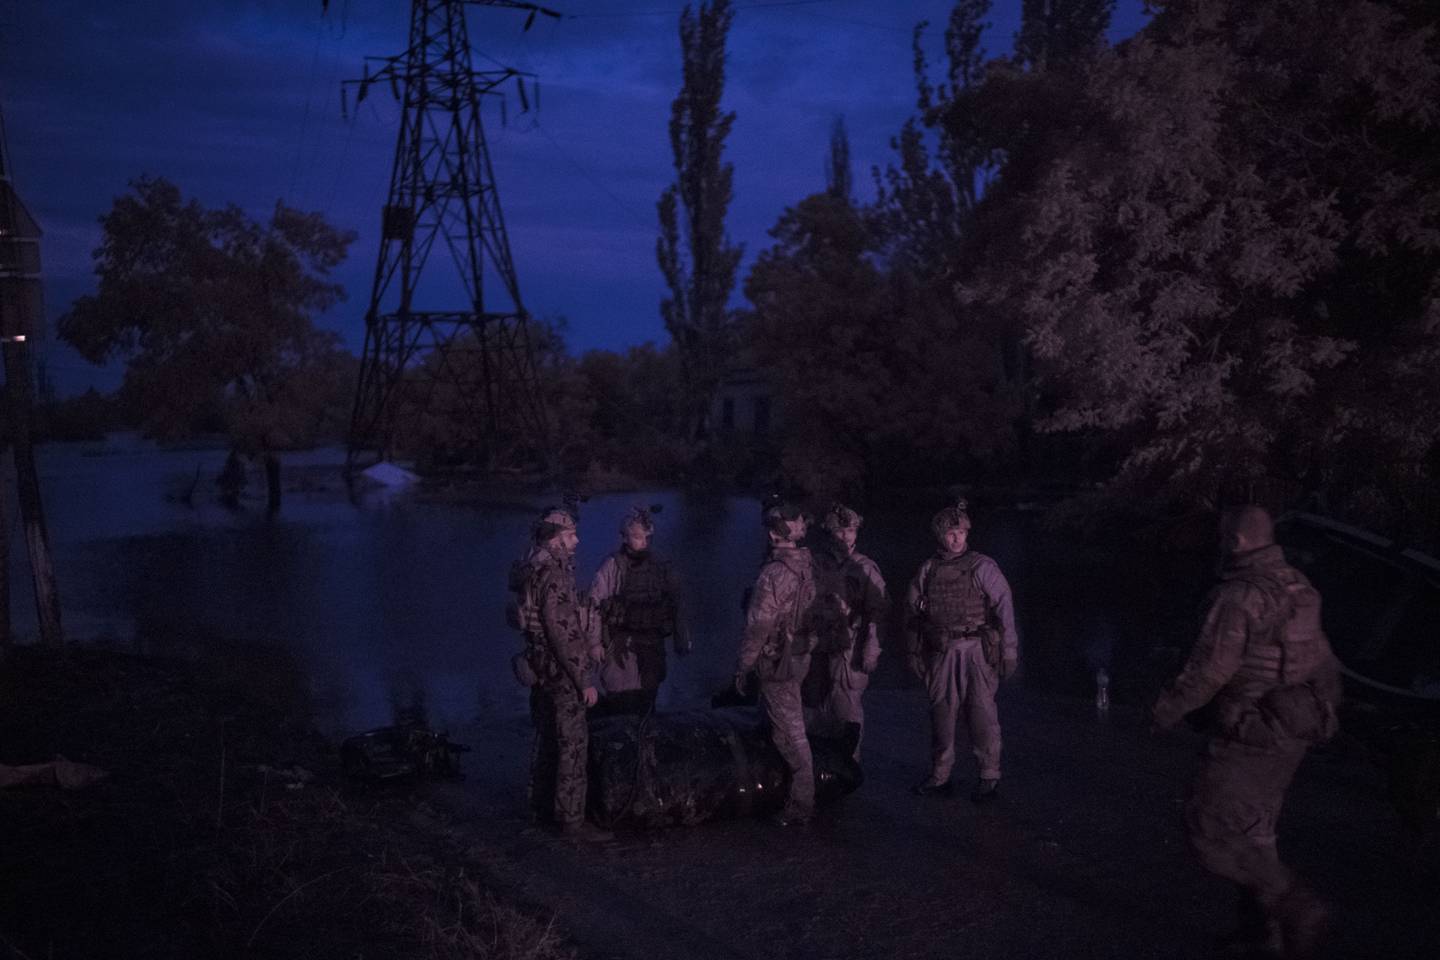 Ukraine Special Operations Forces soldiers prepare for a night mission on the Dnipro River in Kherson region, Ukraine, Sunday, June 11, 2023. (AP Photo/Felipe Dana)